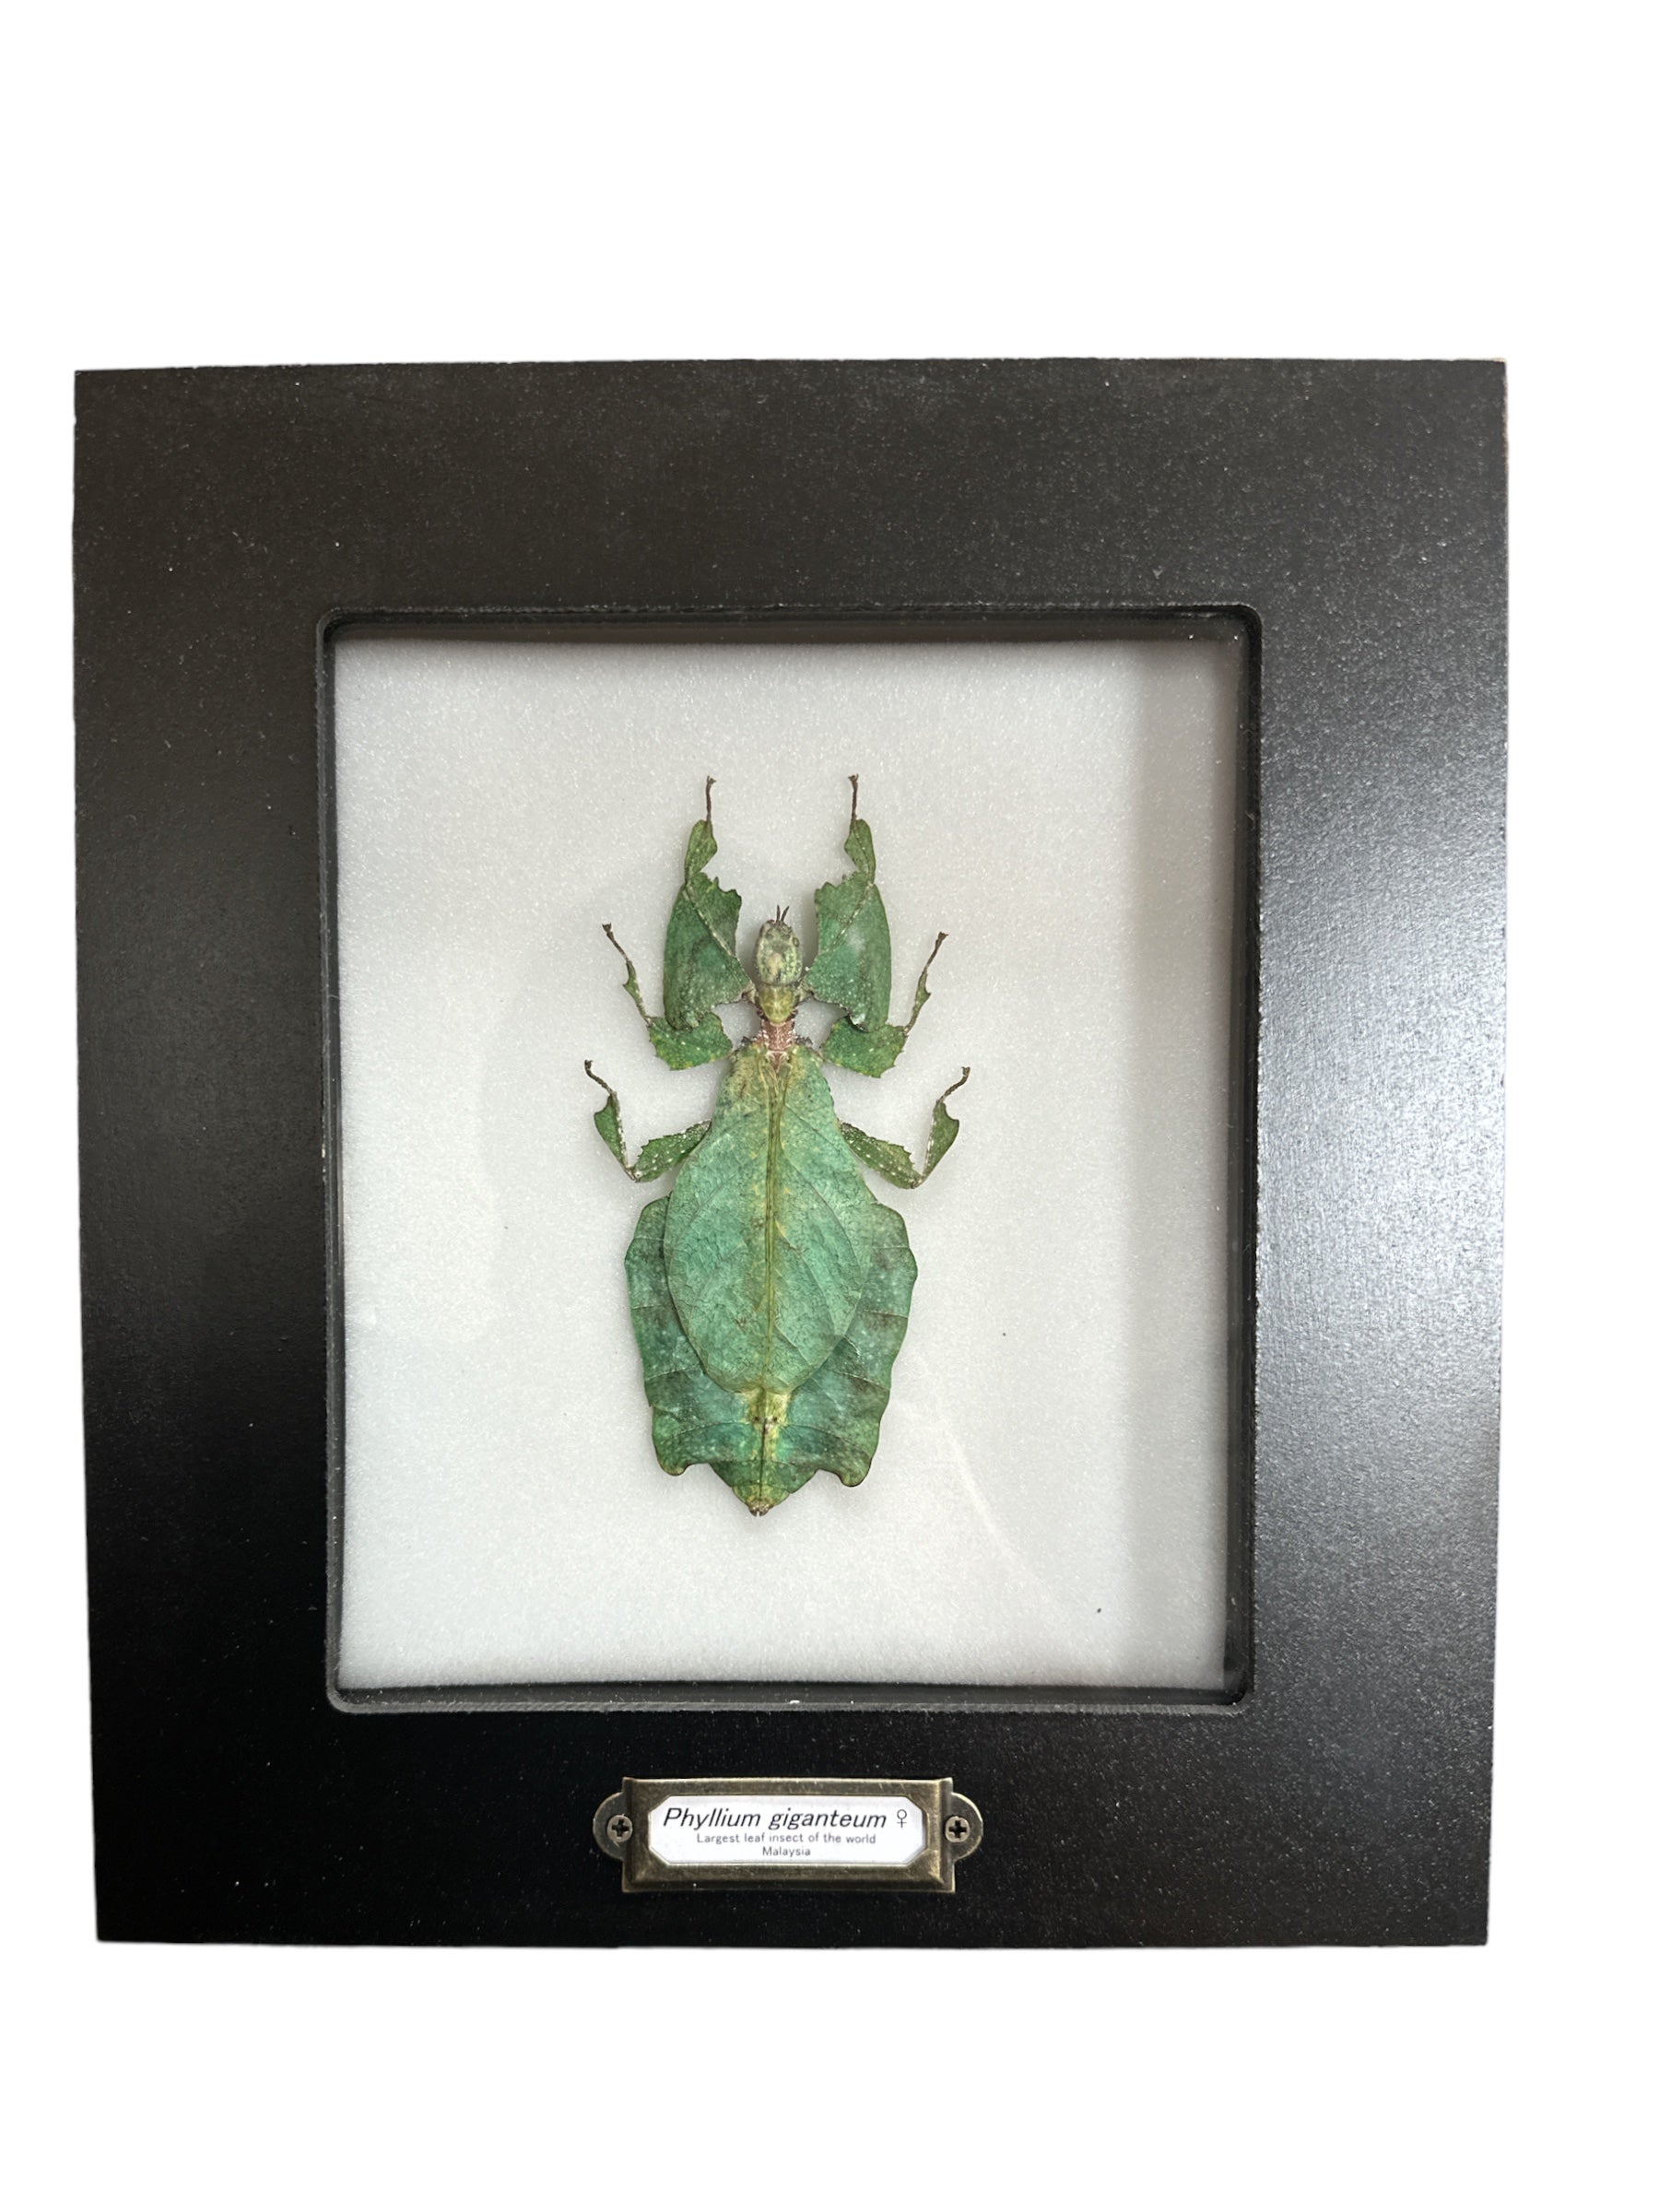 Giant Malaysian Leaf Insect (Phyllium giganteum) - 5x6" Frame